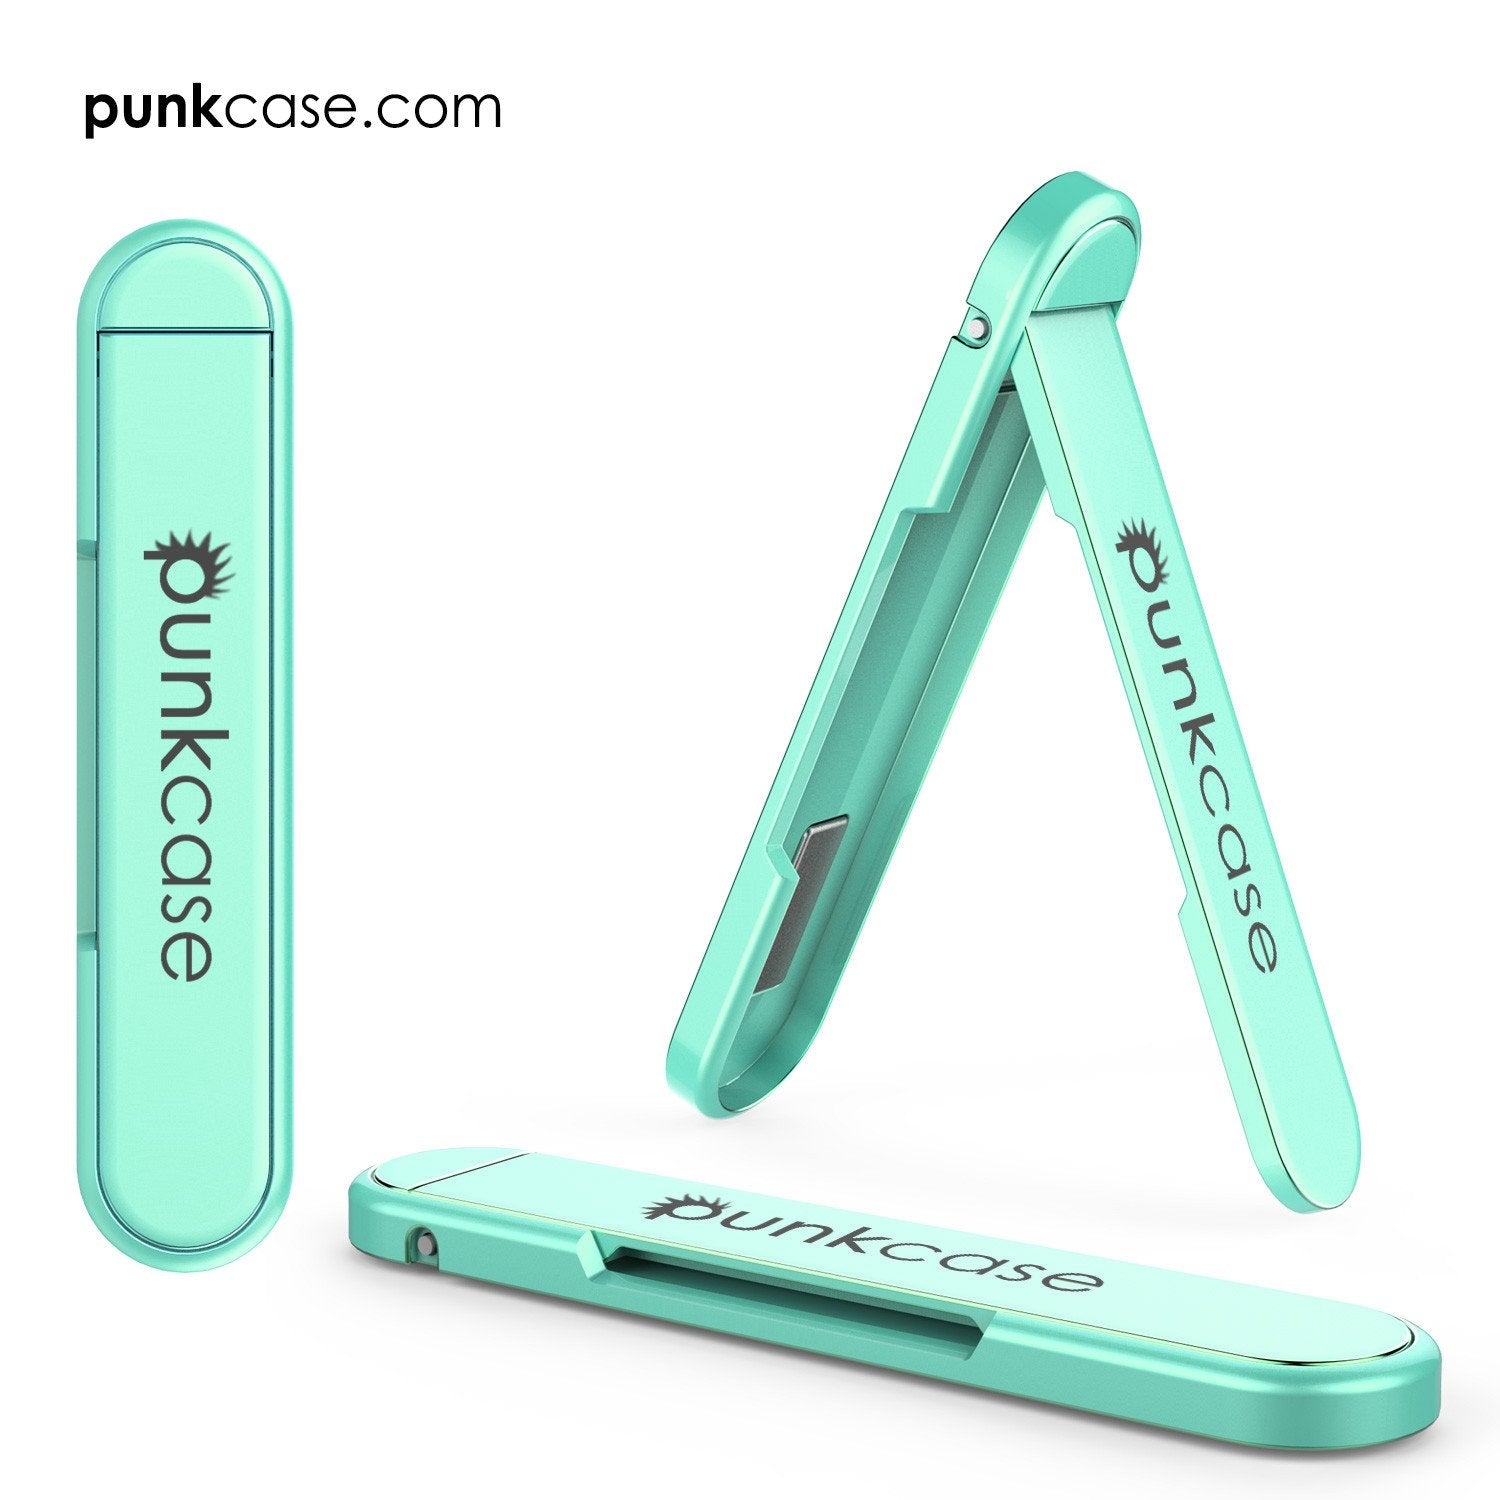 PUNKCASE FlickStick Universal Cell Phone Kickstand for all Mobile Phones & Cases with Flat Backs, One Finger Operation (Teal)